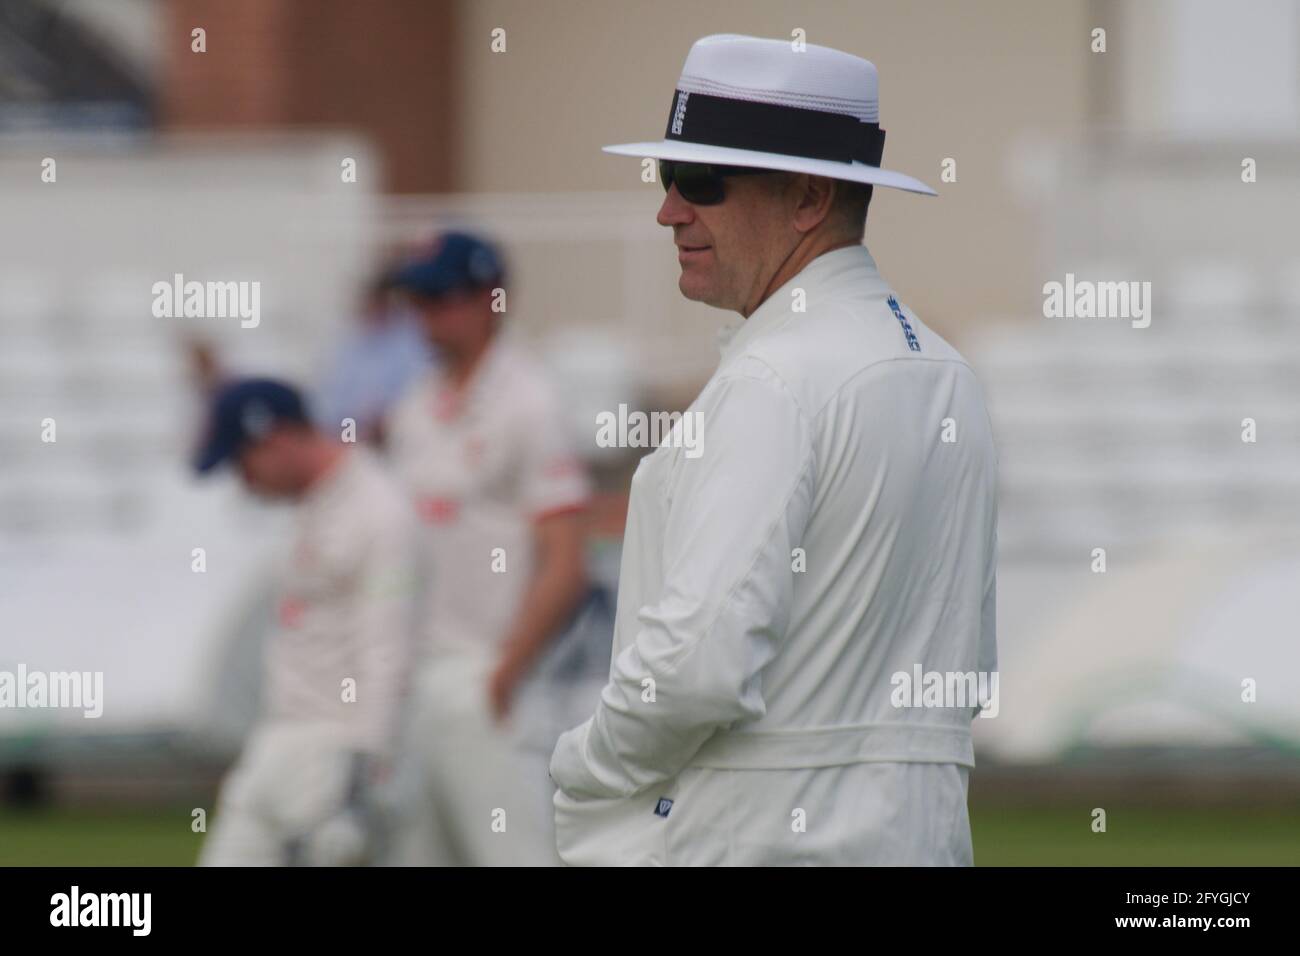 Chester le Street, England, 28 May 2021. James Middlebrook, umpire, standing in the Durham against Essex LV= County Championship match at the Riverside Ground, Chester le Street. Credit: Colin Edwards/Alamy Live News. Stock Photo